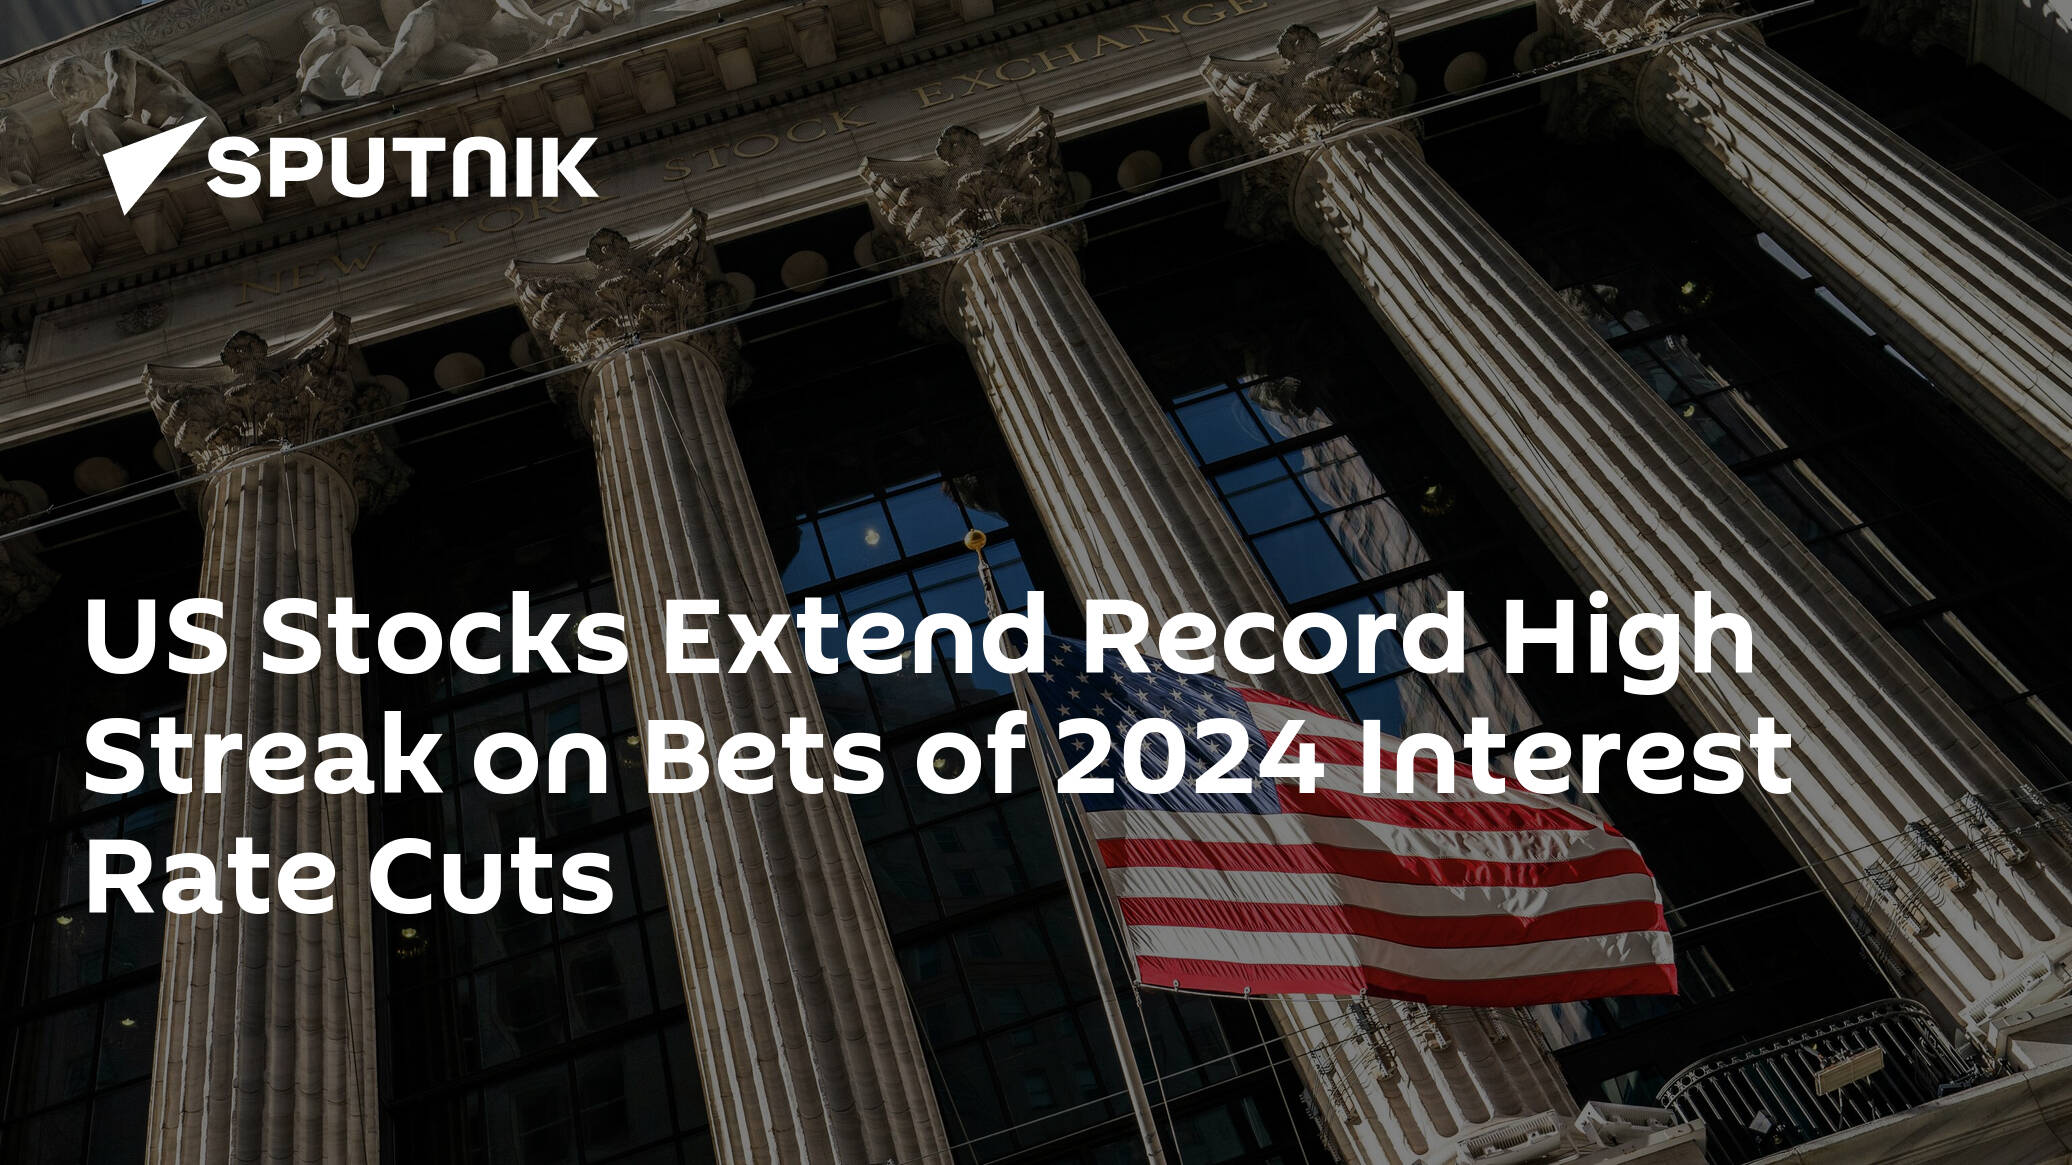 US Stocks Extend Record High Streak on Bets of Interest Rate Cuts in 2024